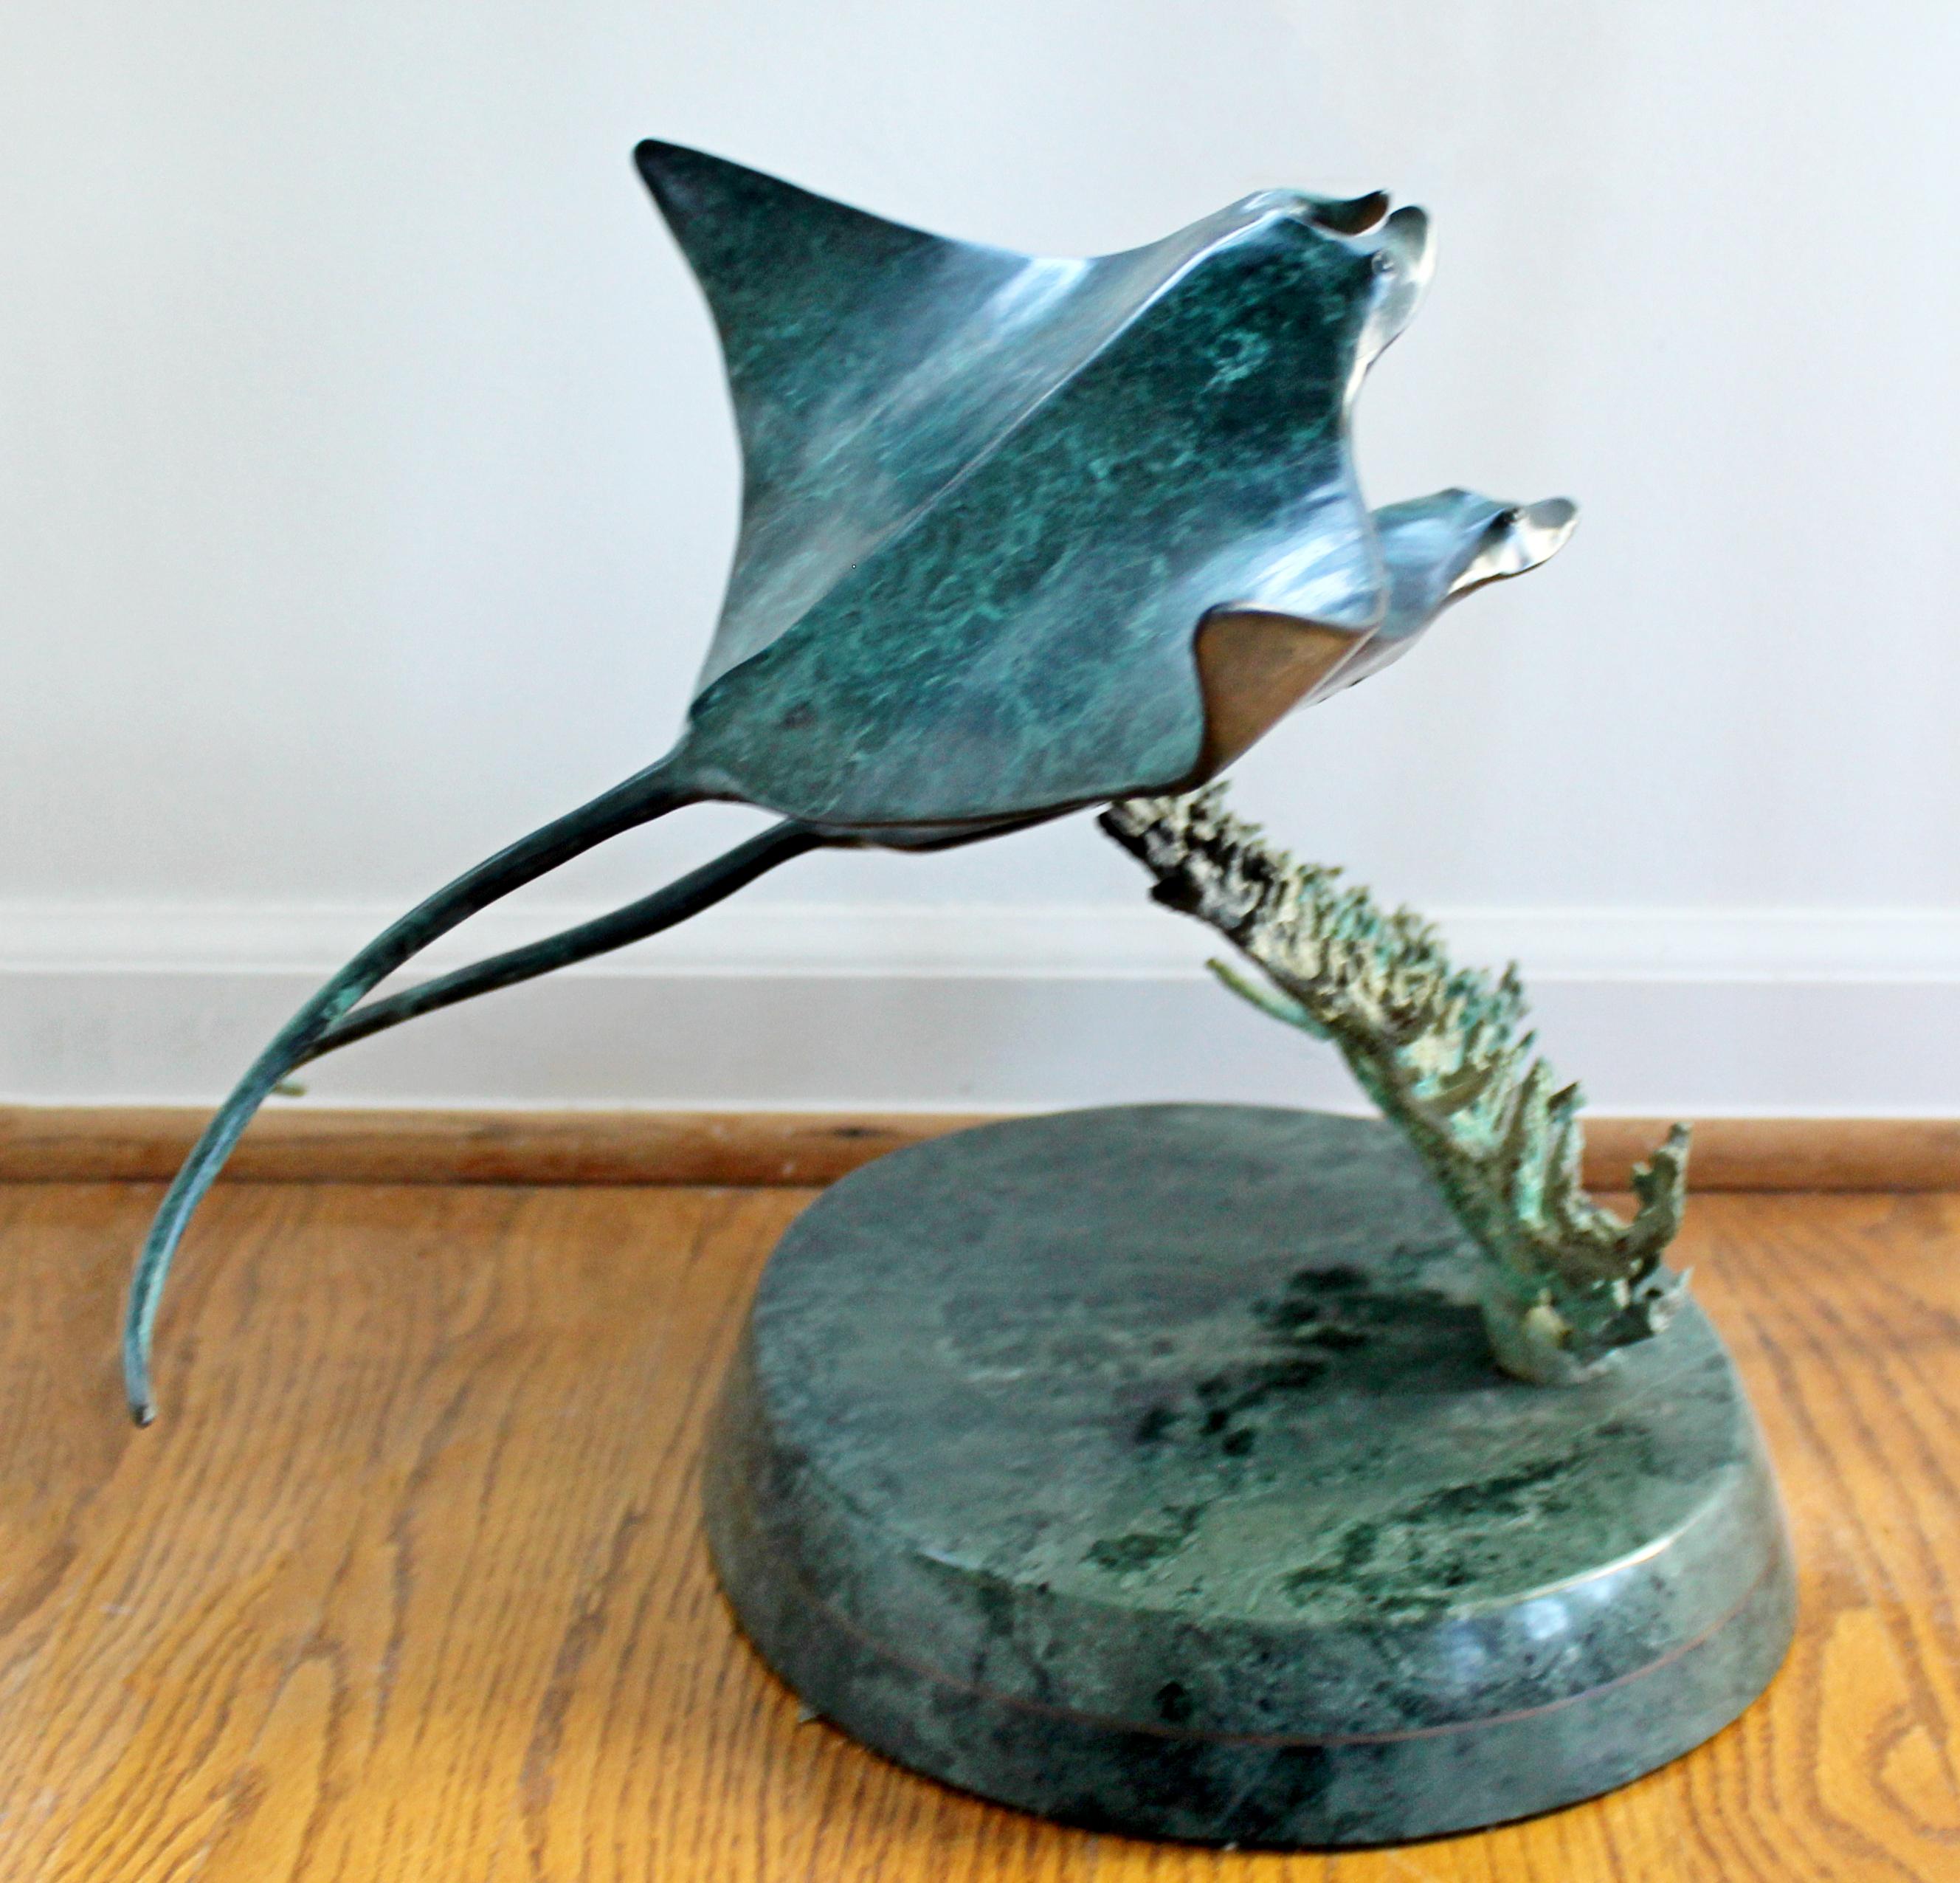 Late 20th Century Contemporary Bronze Sculpture Signed Robert Wyland Manta Rays #40/300, 1990s